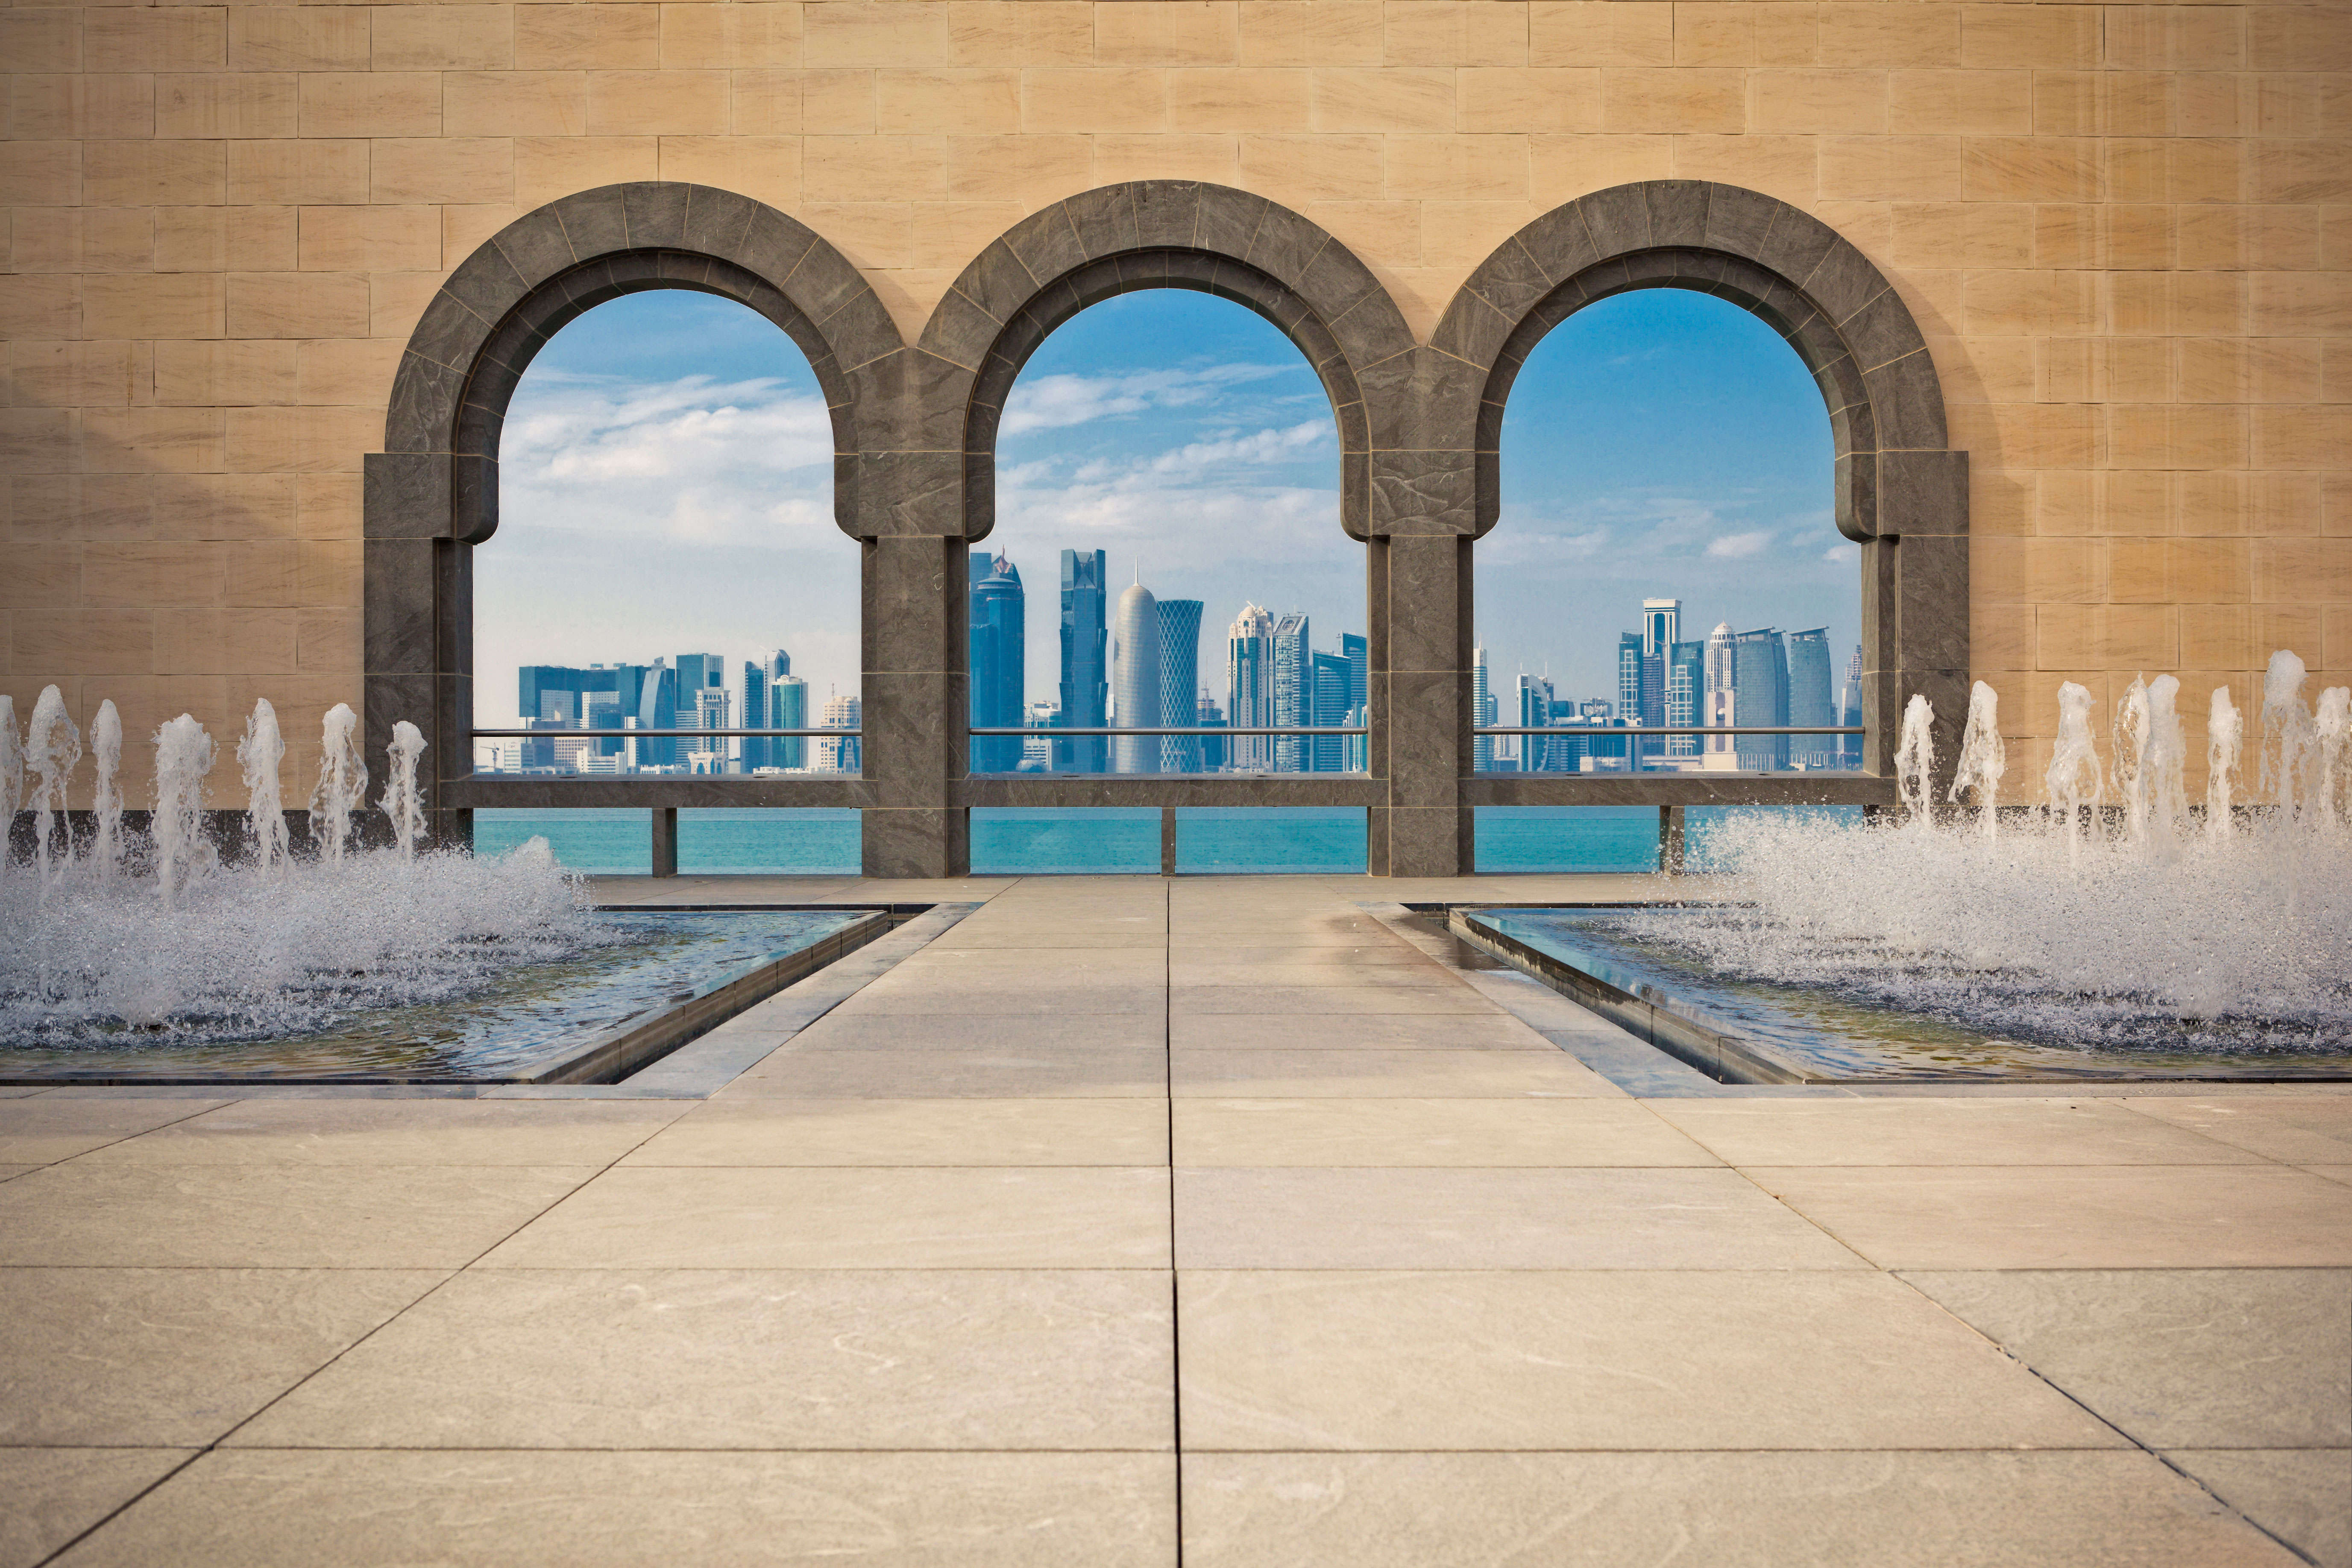 The Museum of Islamic Art is one of the very best things to do in Qatar